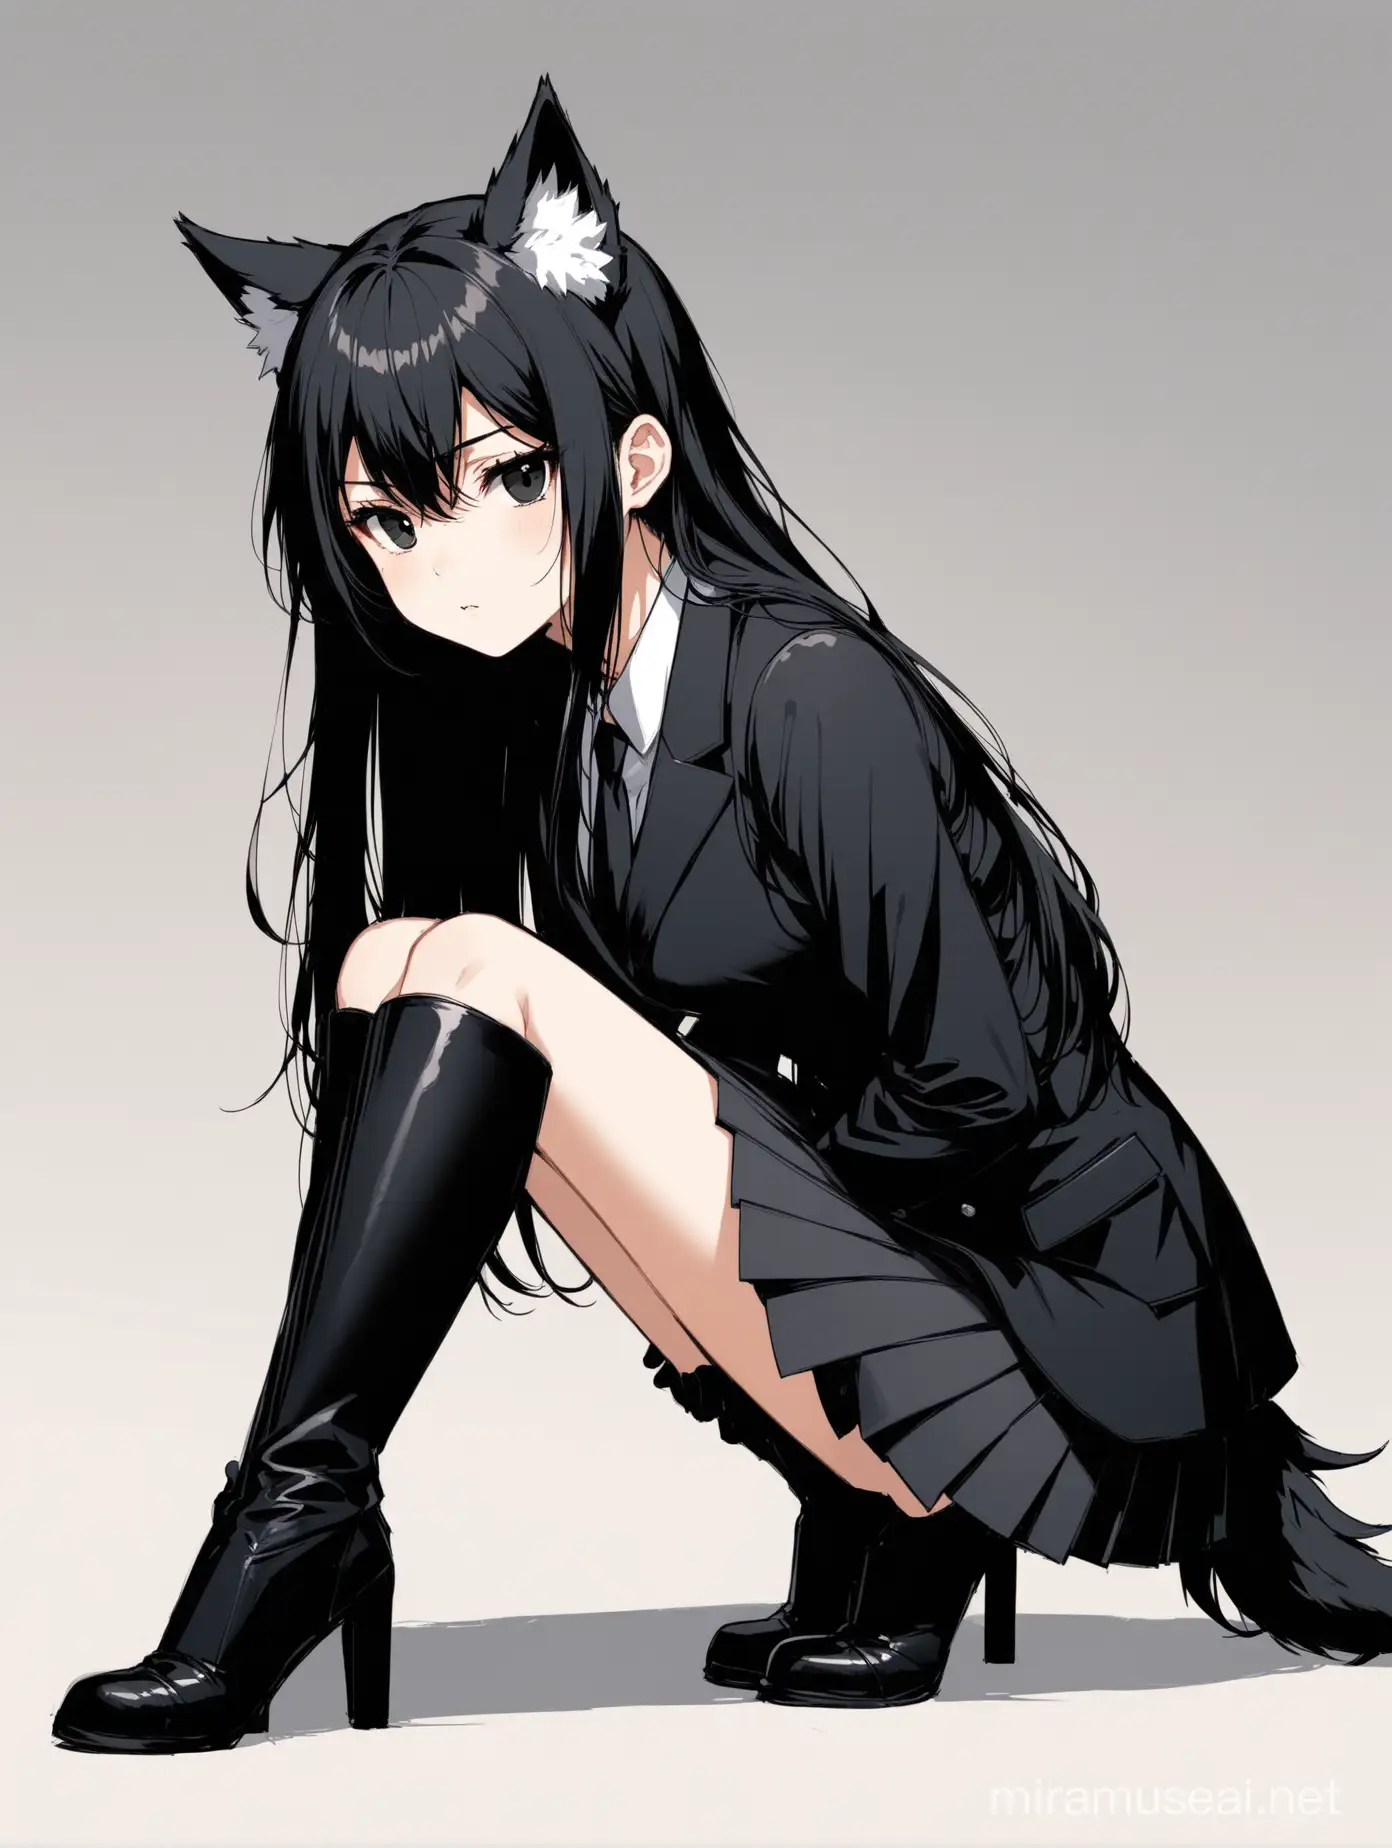 Tall Wolf Girl in Black Outfit Kneeling with Neutral Expression